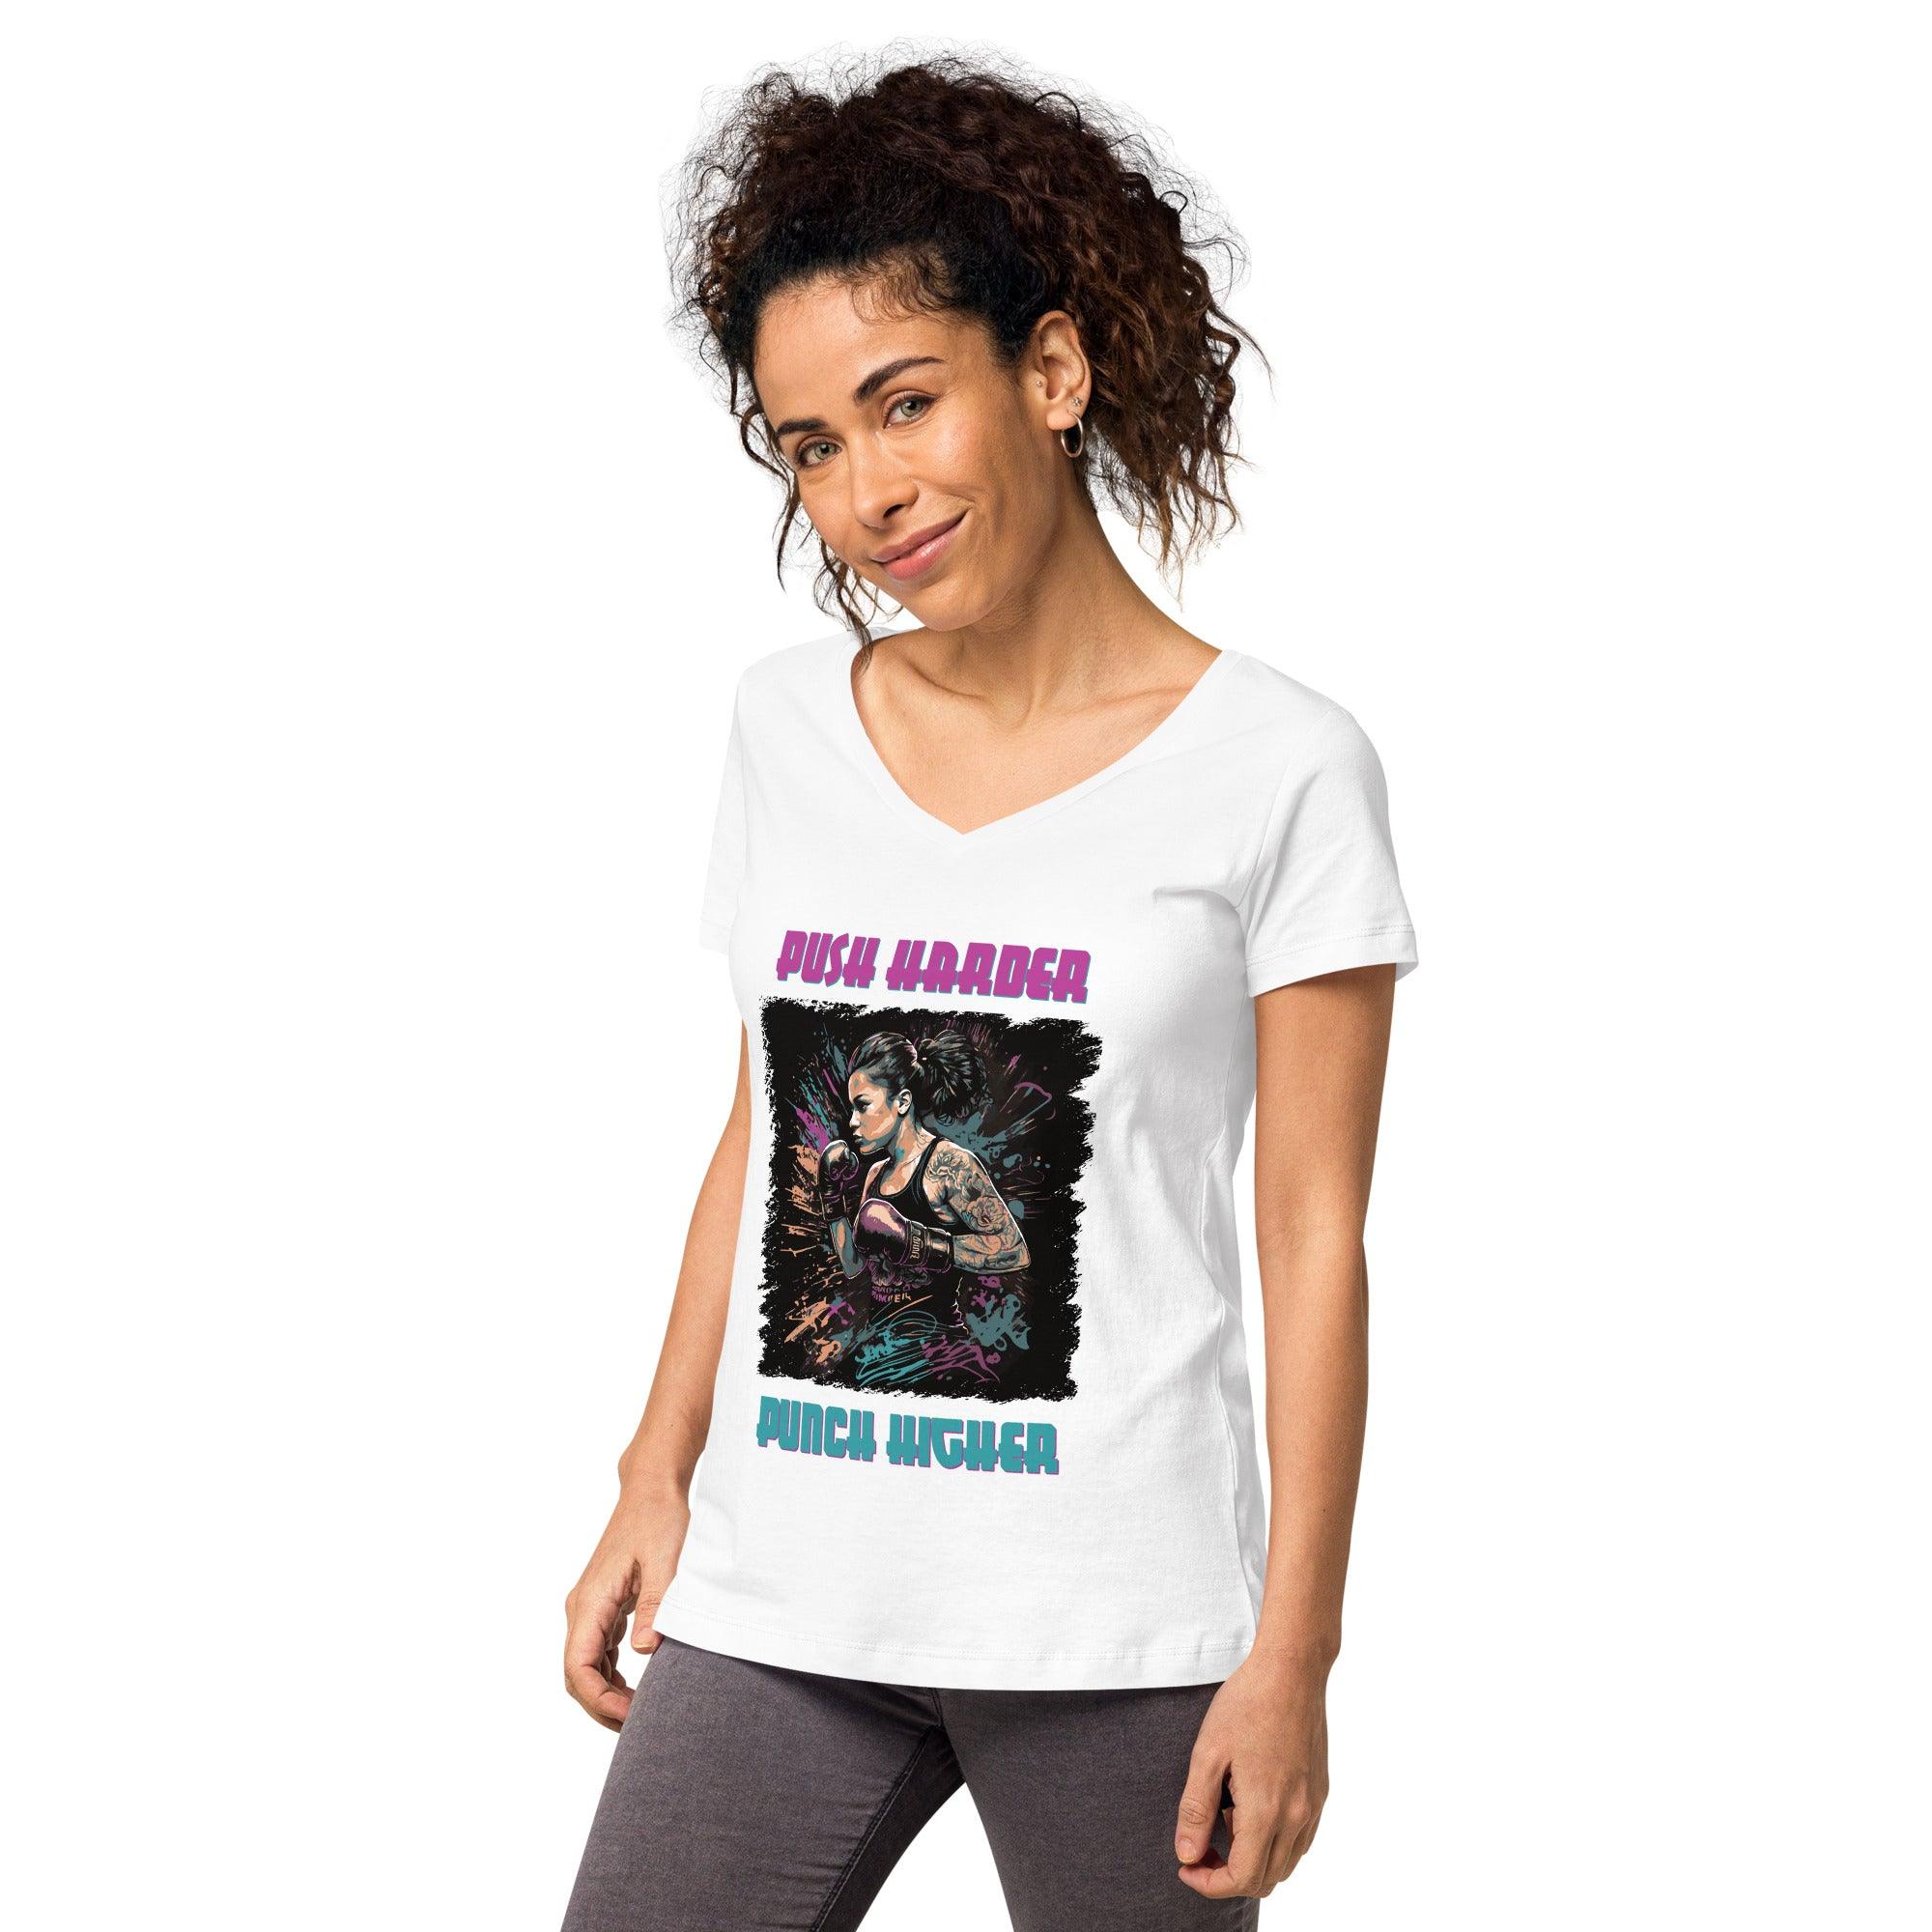 Push Harder Punch Higher Women’s Fitted V-neck T-shirt - Beyond T-shirts